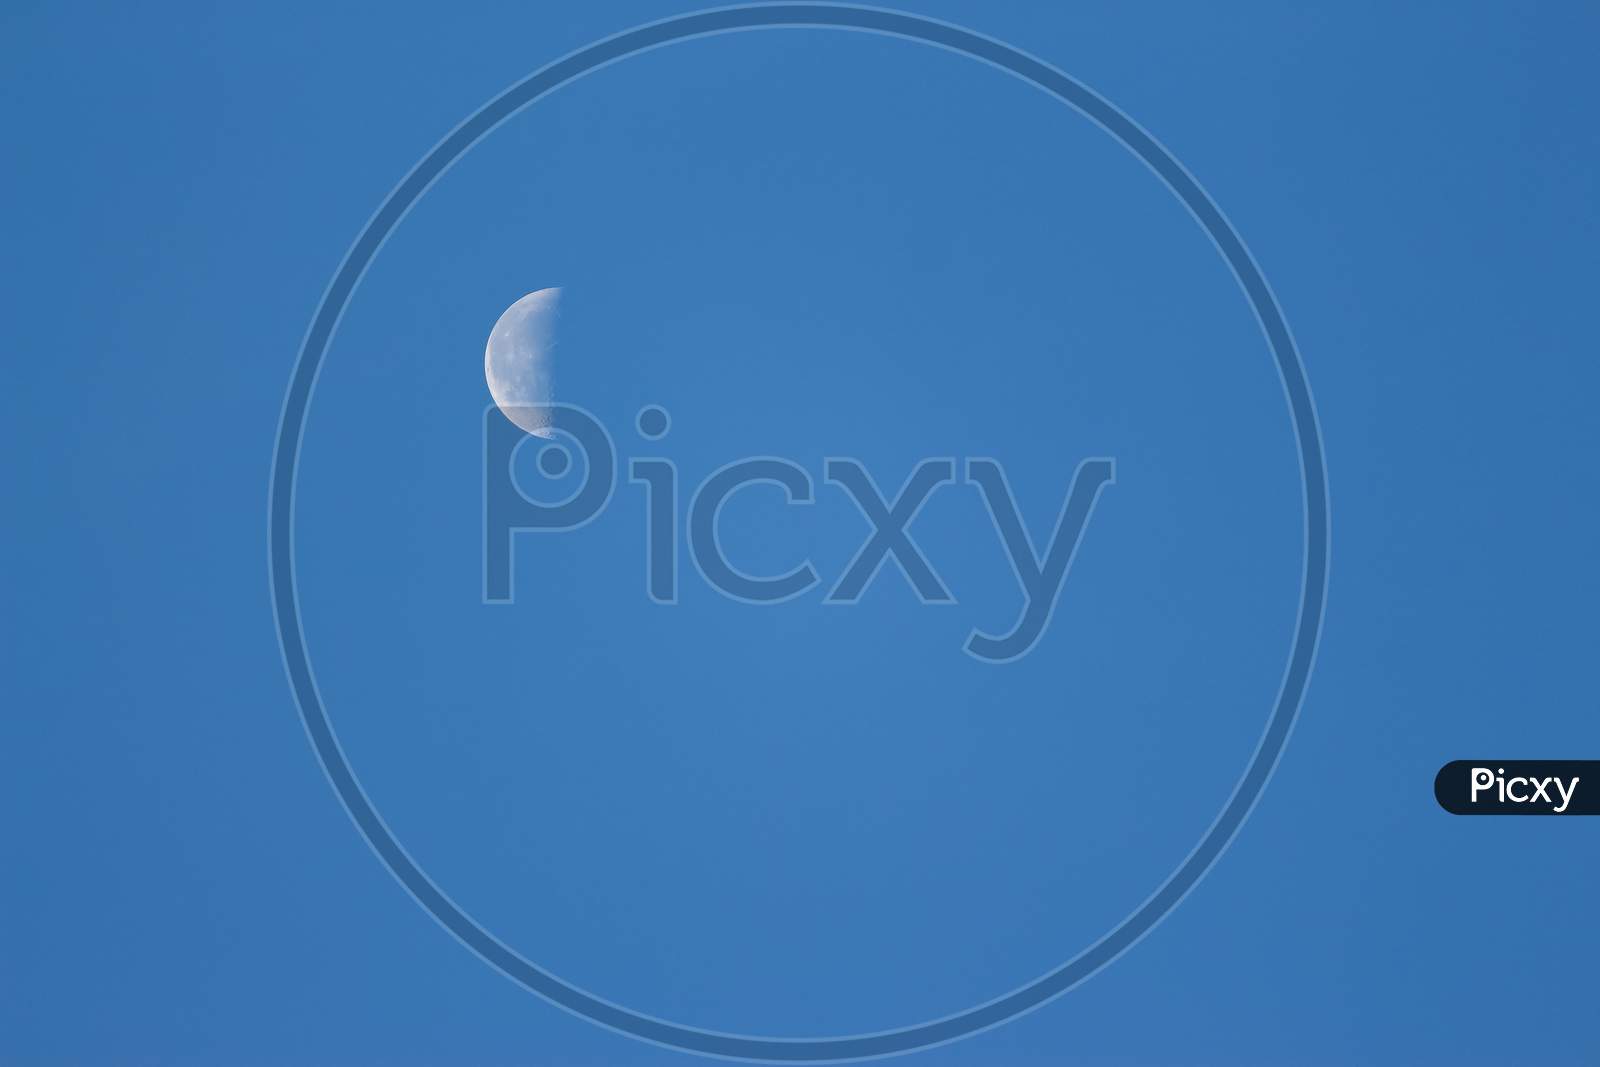 Moon Lunar / Luna On The Blue Sky. Half Lunar Moon In A Clear Daylight Sky. Earth Moon Lunar On Day Time With Copy Space For Text. Luna On The Day Sky. Selene .Cynthia